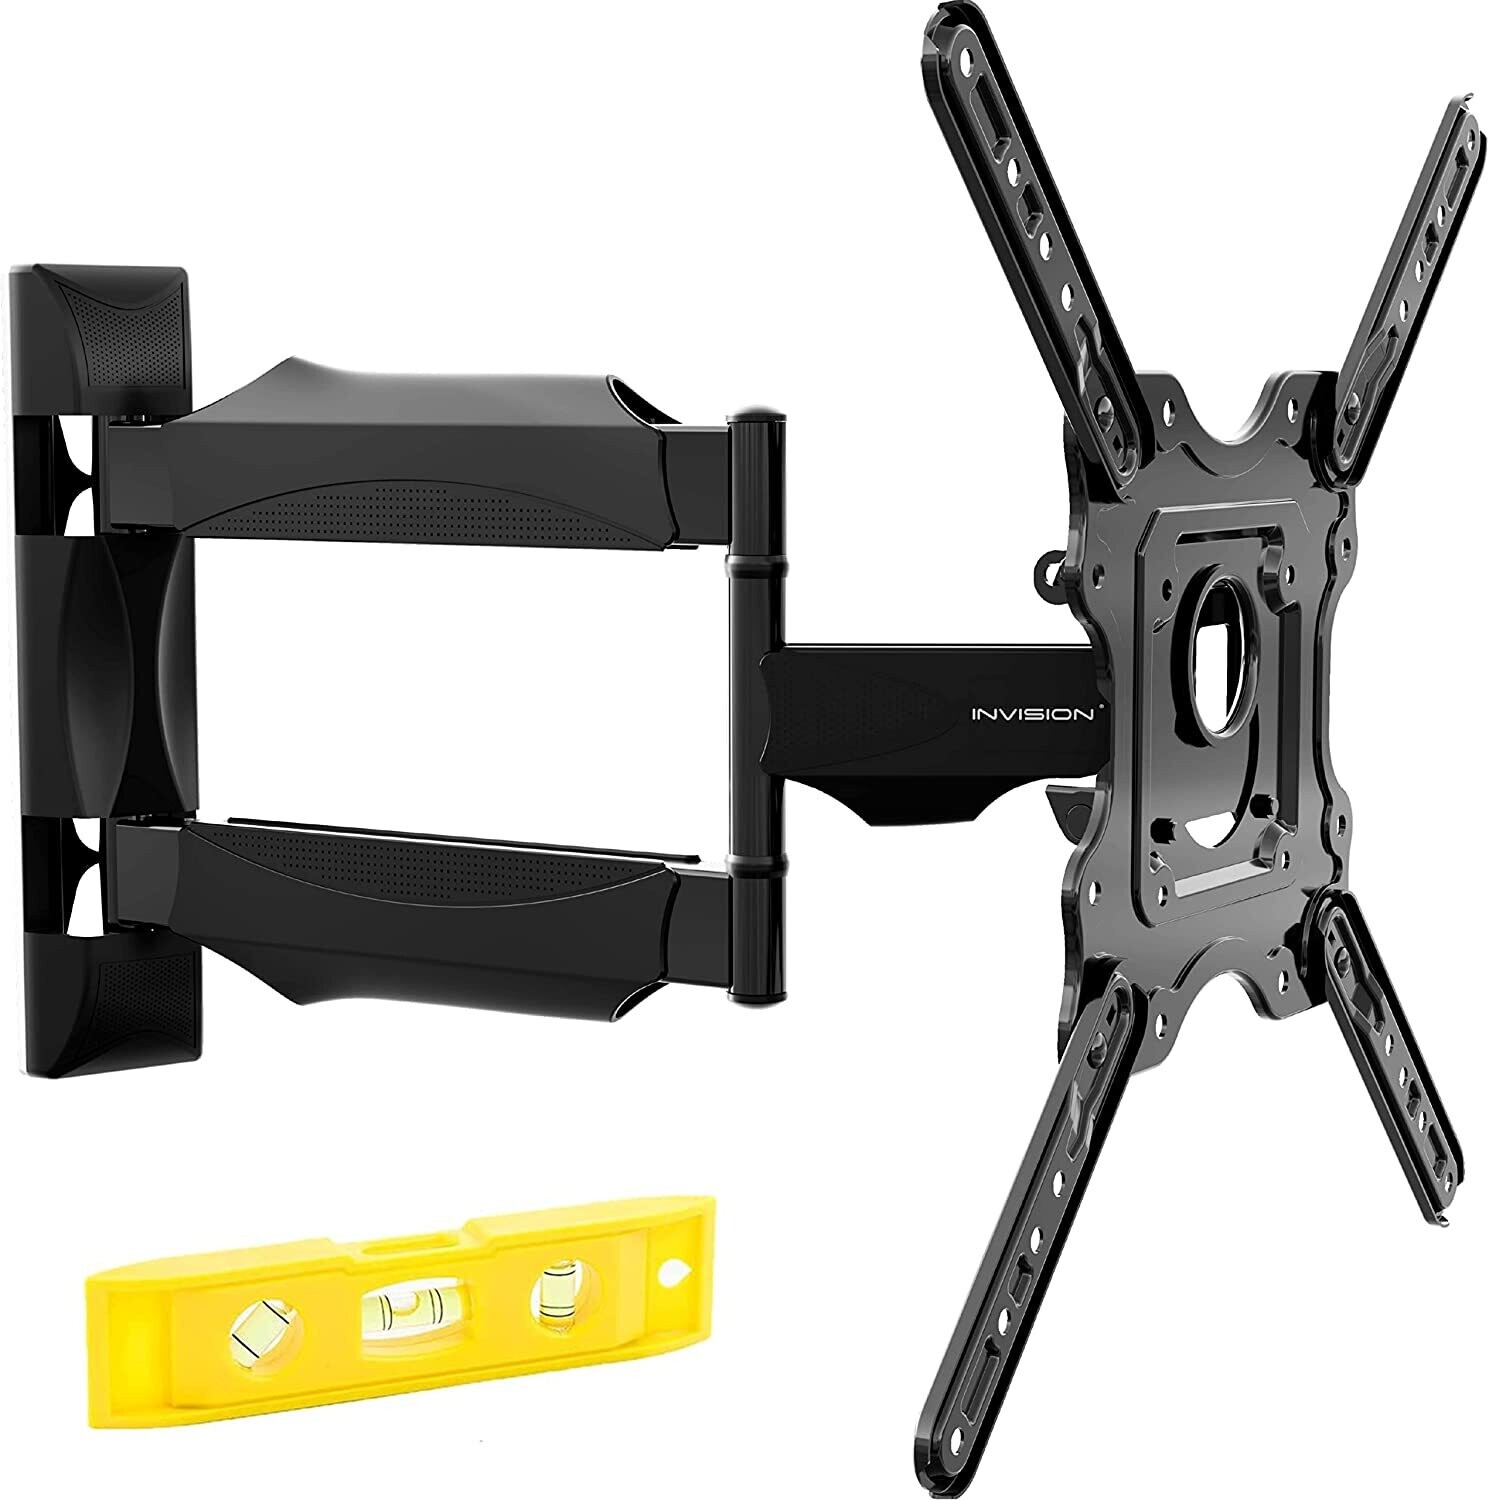 TV Wall Bracket Mount for Screens 24-60 Inches